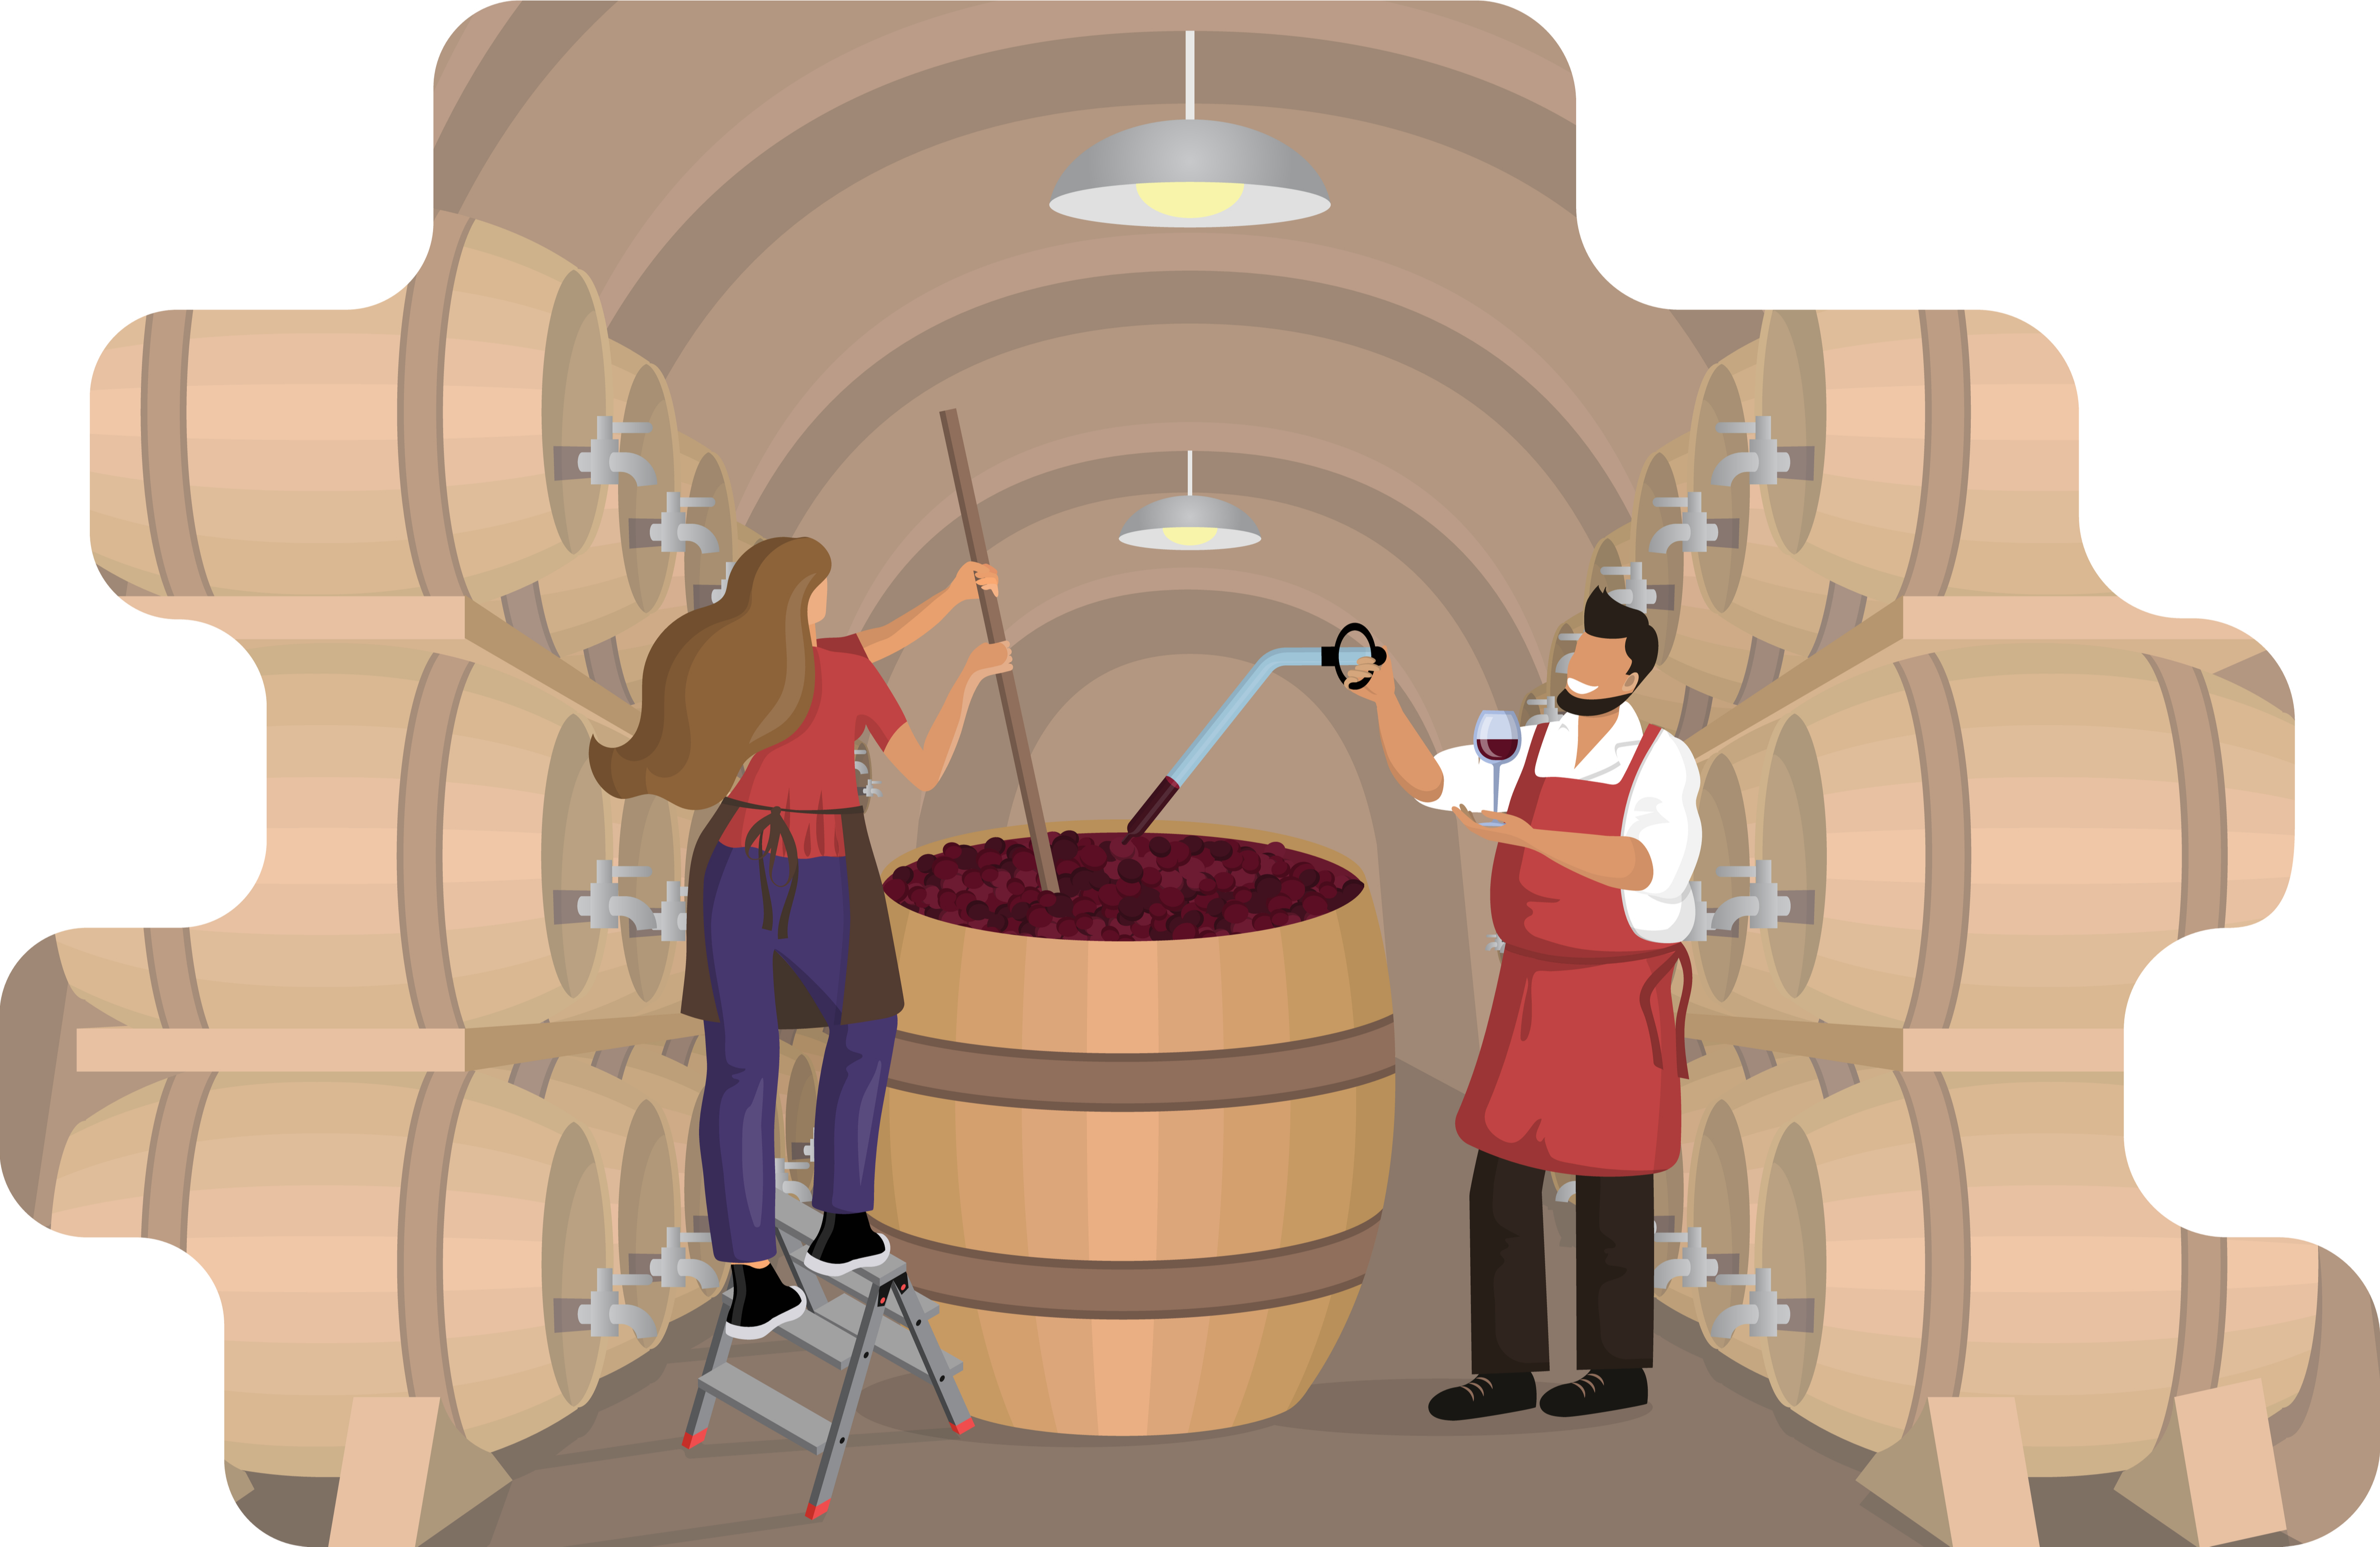 Illustration of a man and woman mixing grapes in wine barrels.